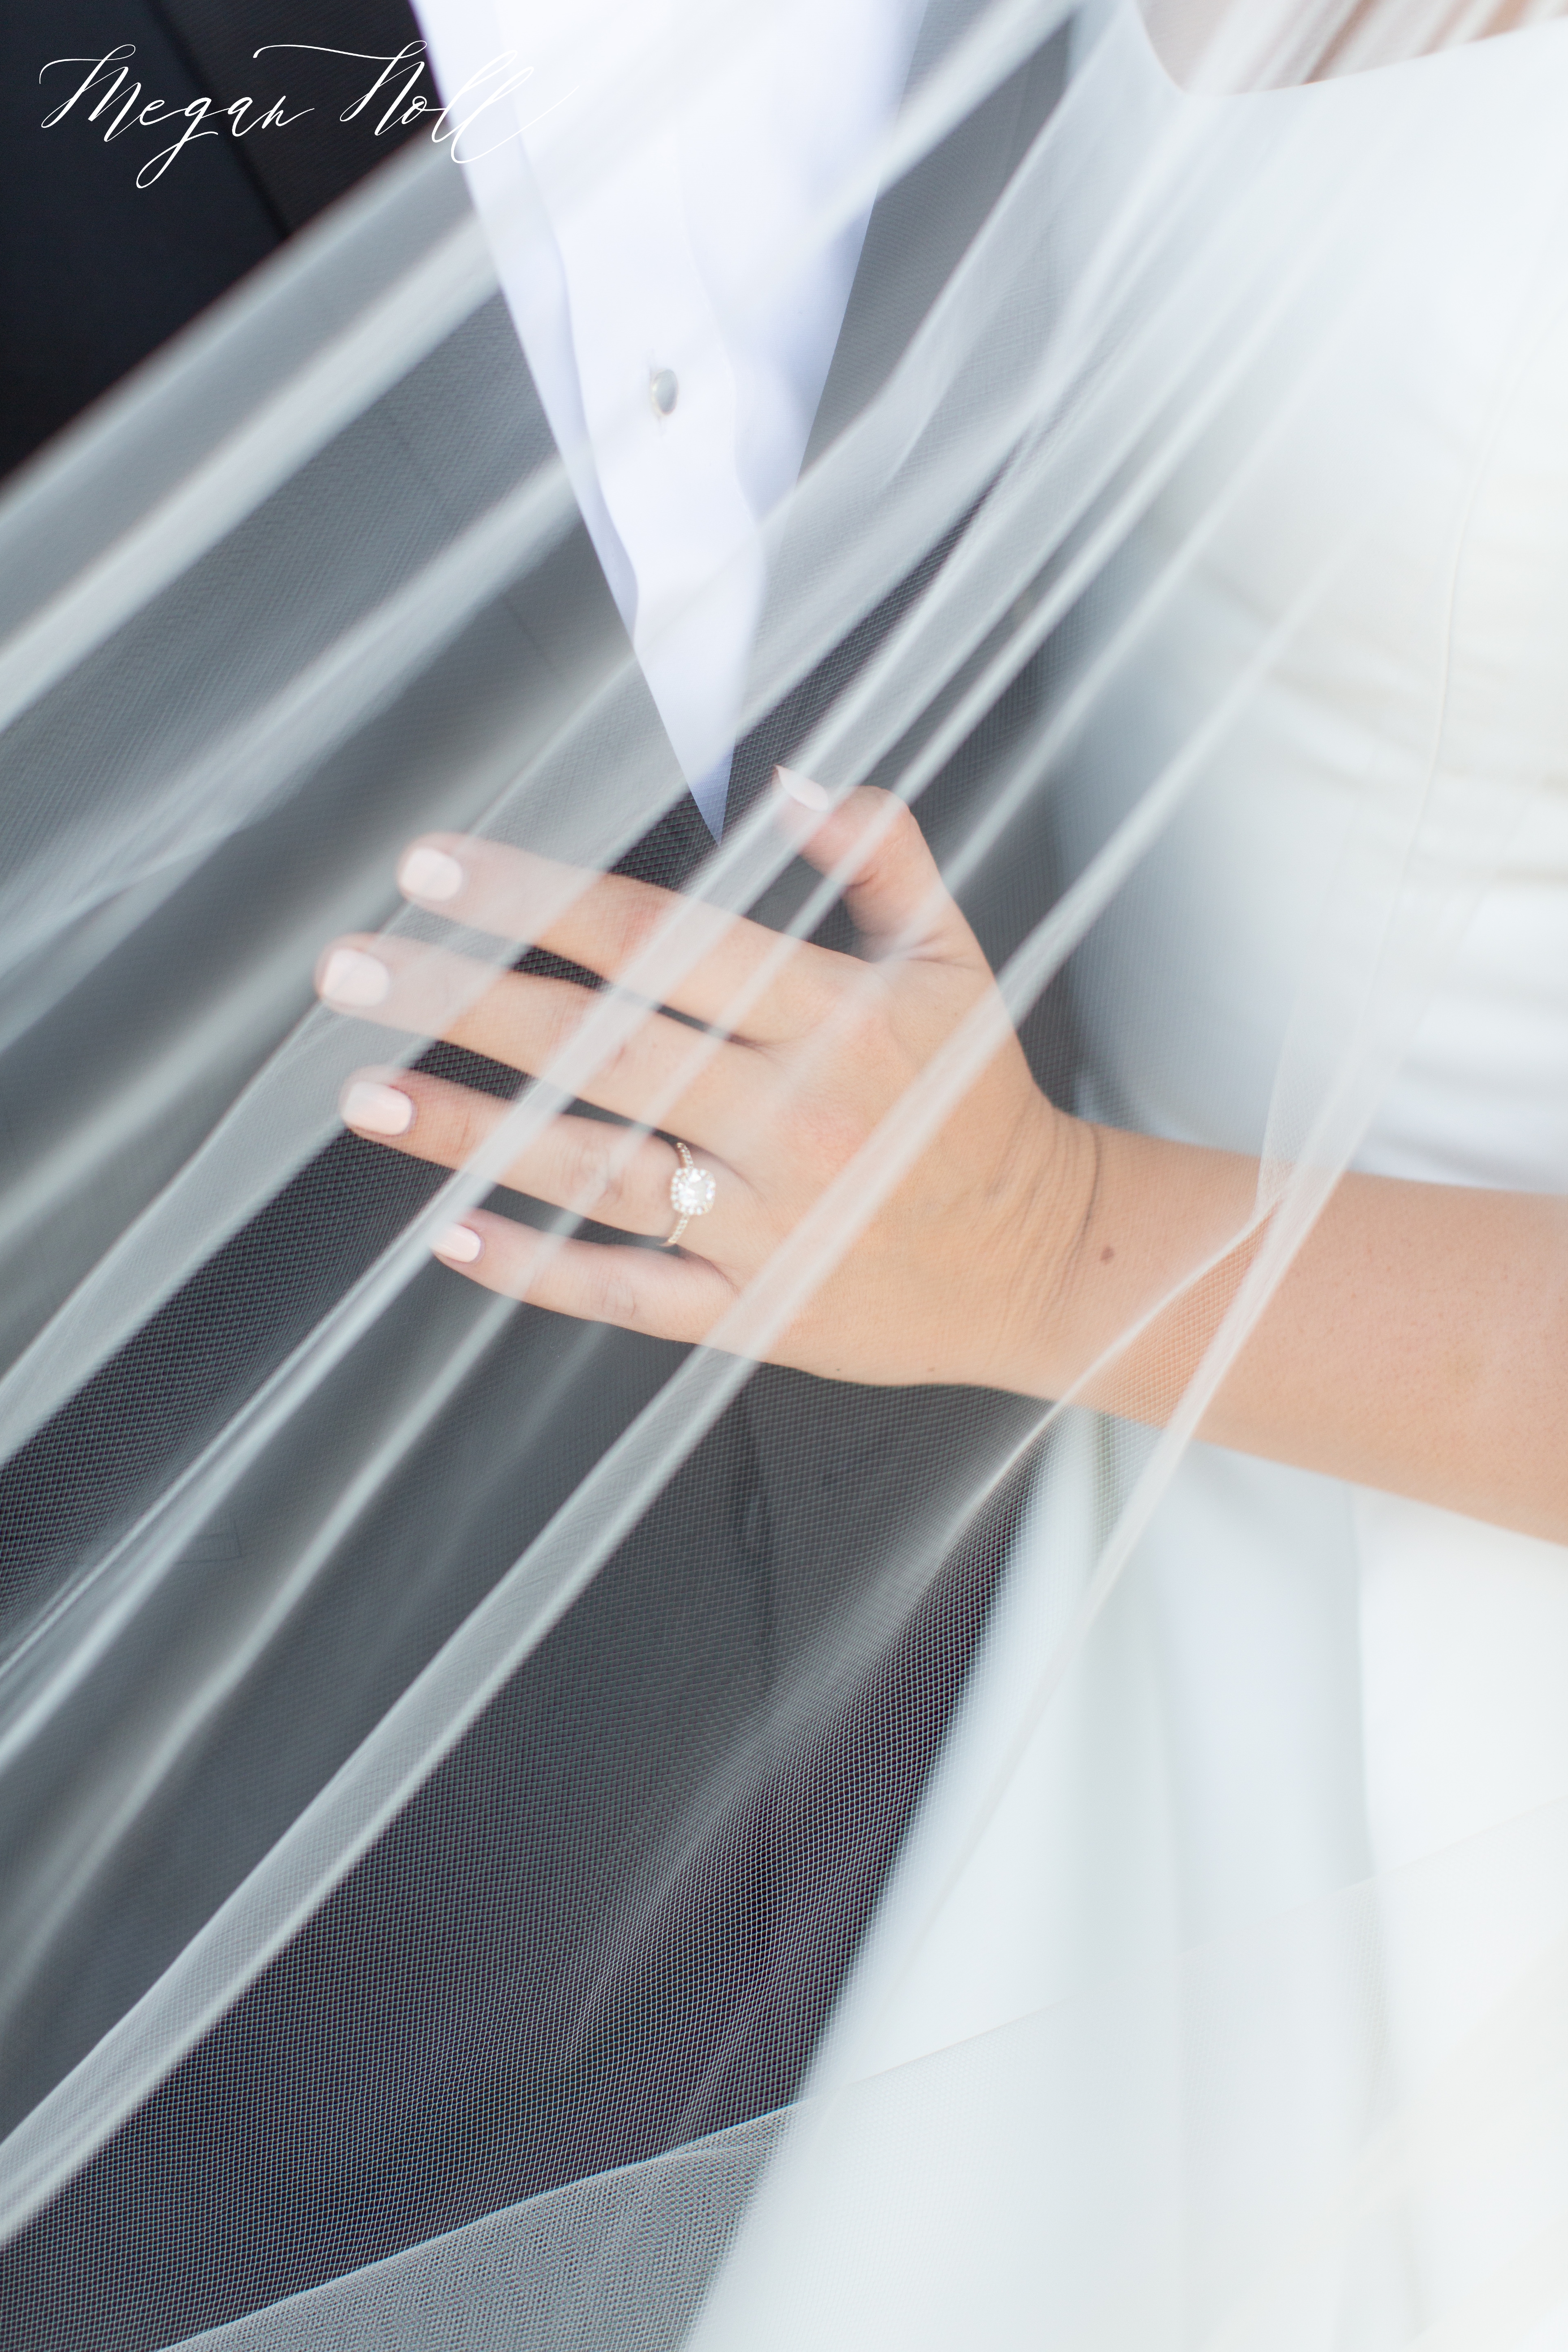 Brides hand on grooms chest